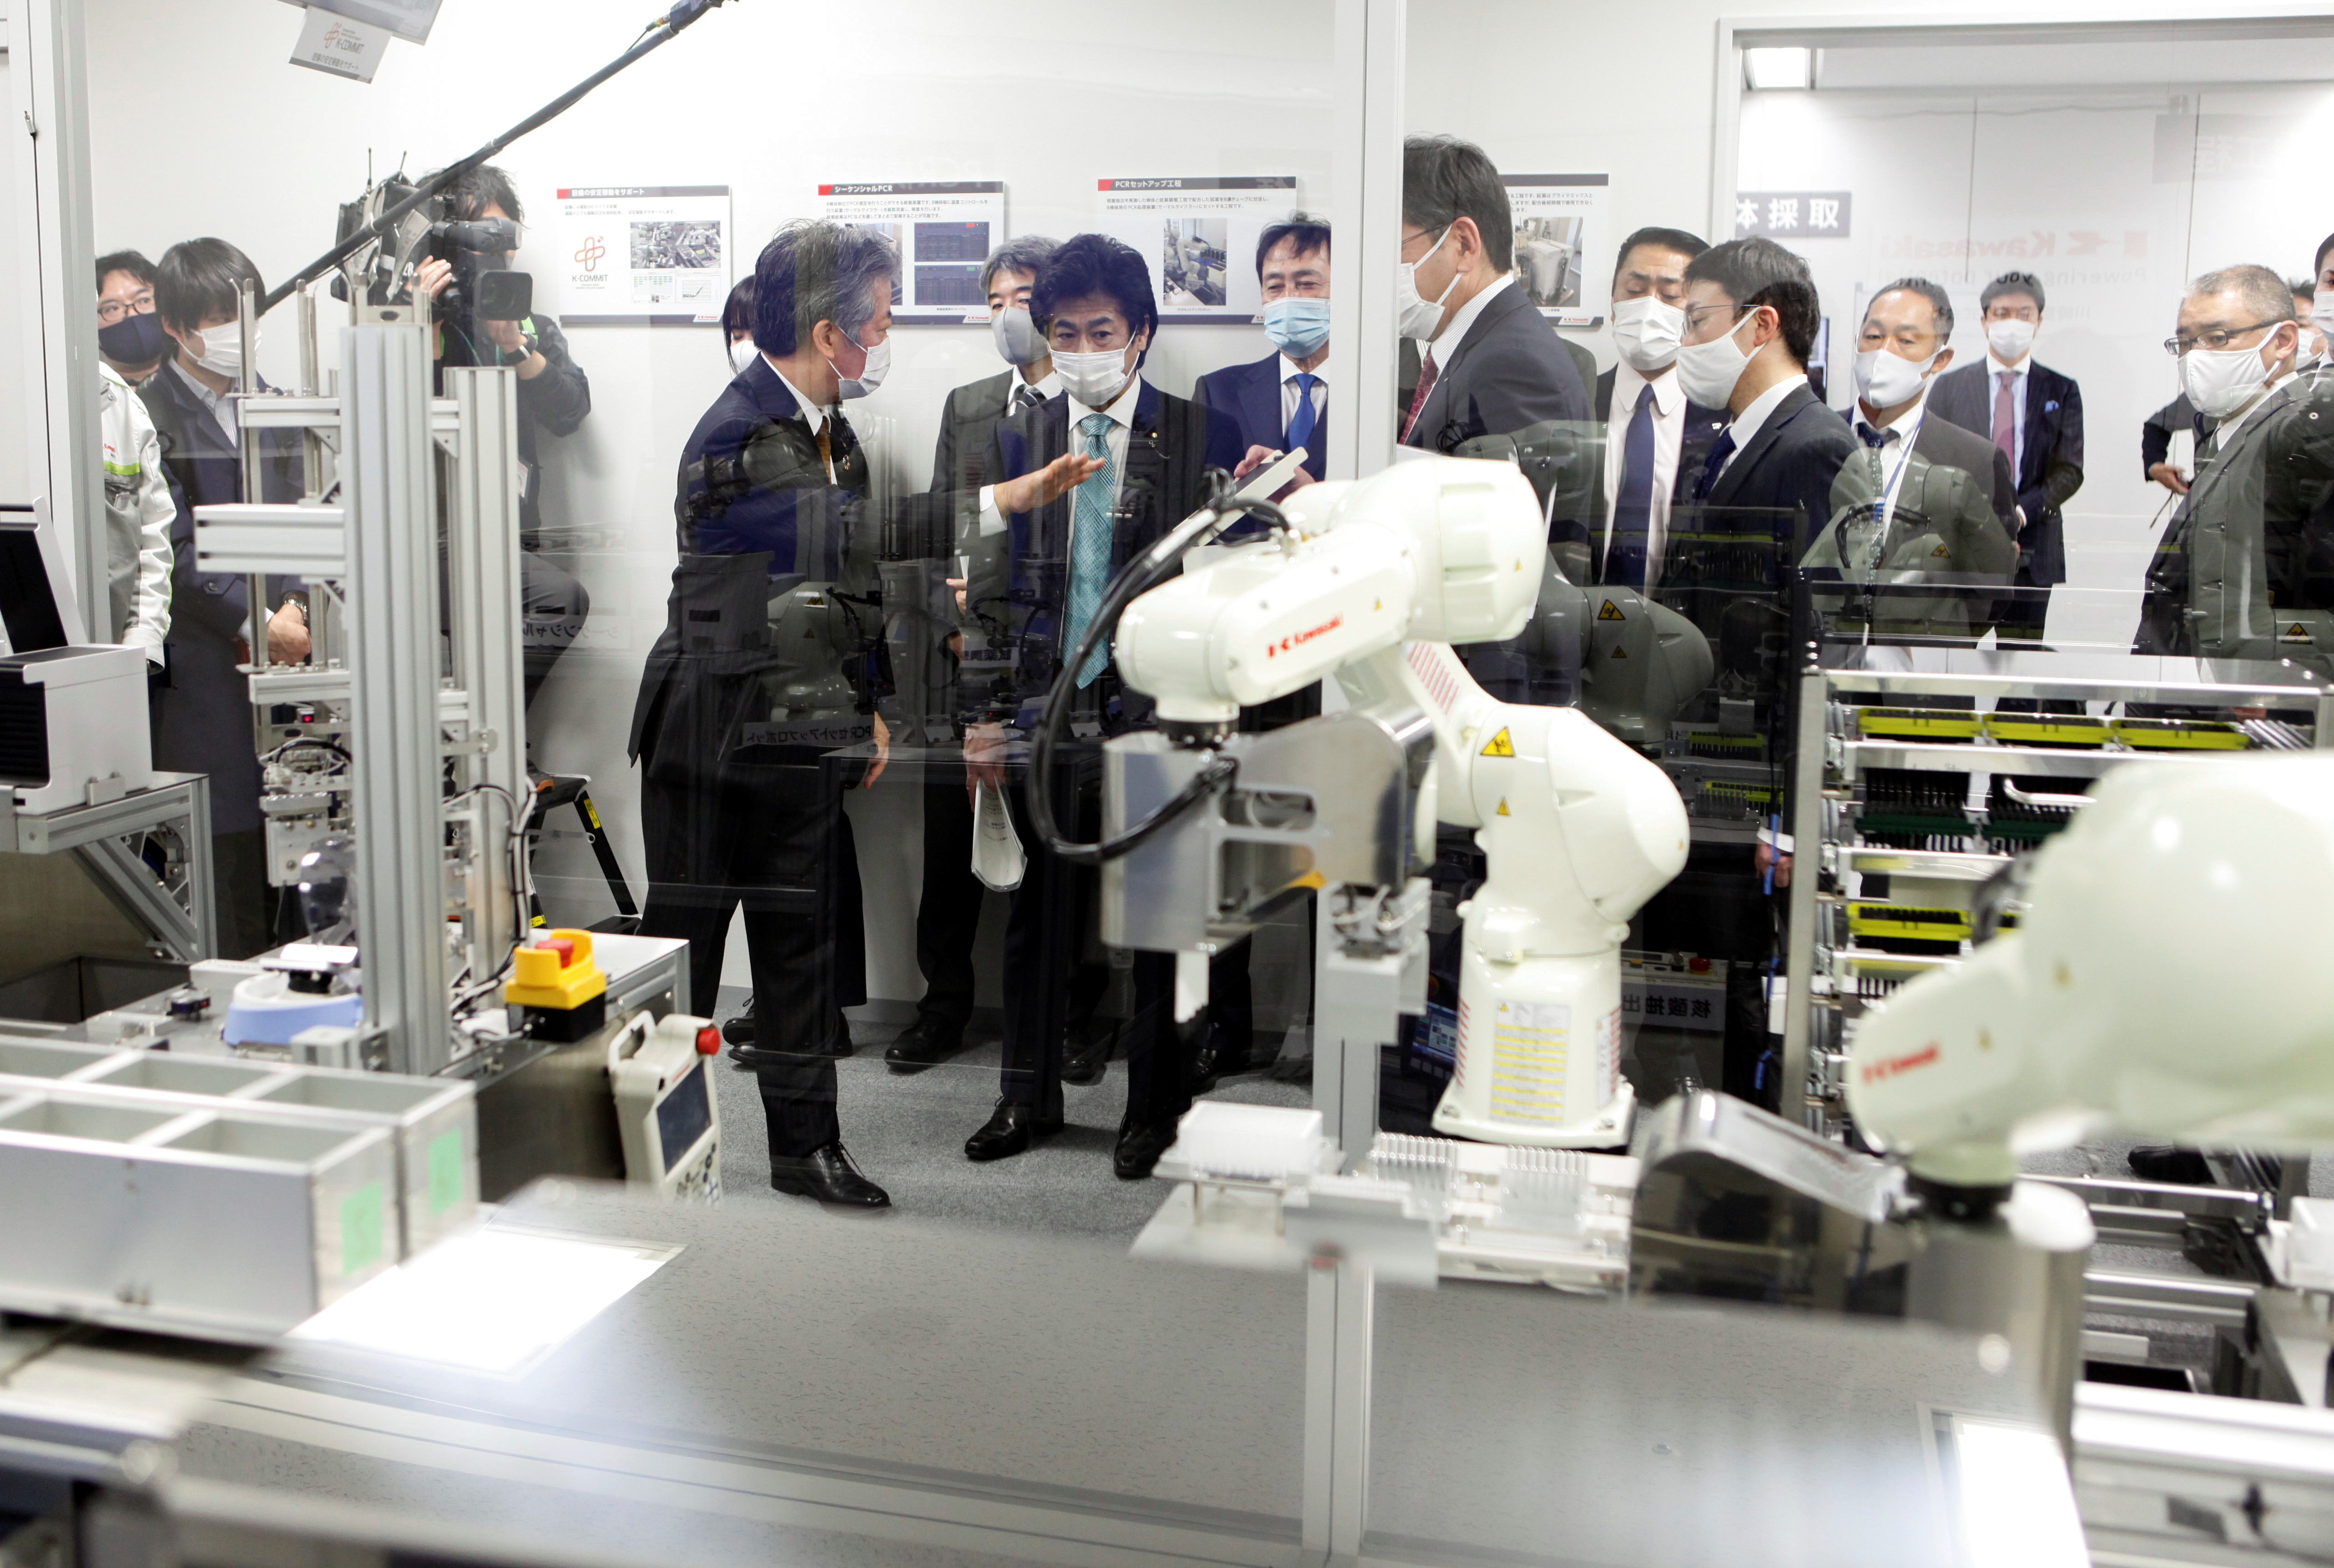 Japan's Health Minister Norihisa Tamura visits the Kawasaki Heavy Industries' Tokyo Robot Centre, a facility that researches polymerase chain reaction (PCR) test automation, amid the coronavirus disease (COVID-19) pandemic, in Tokyo, Japan January 19, 2021. REUTERS/Akira Tomoshige